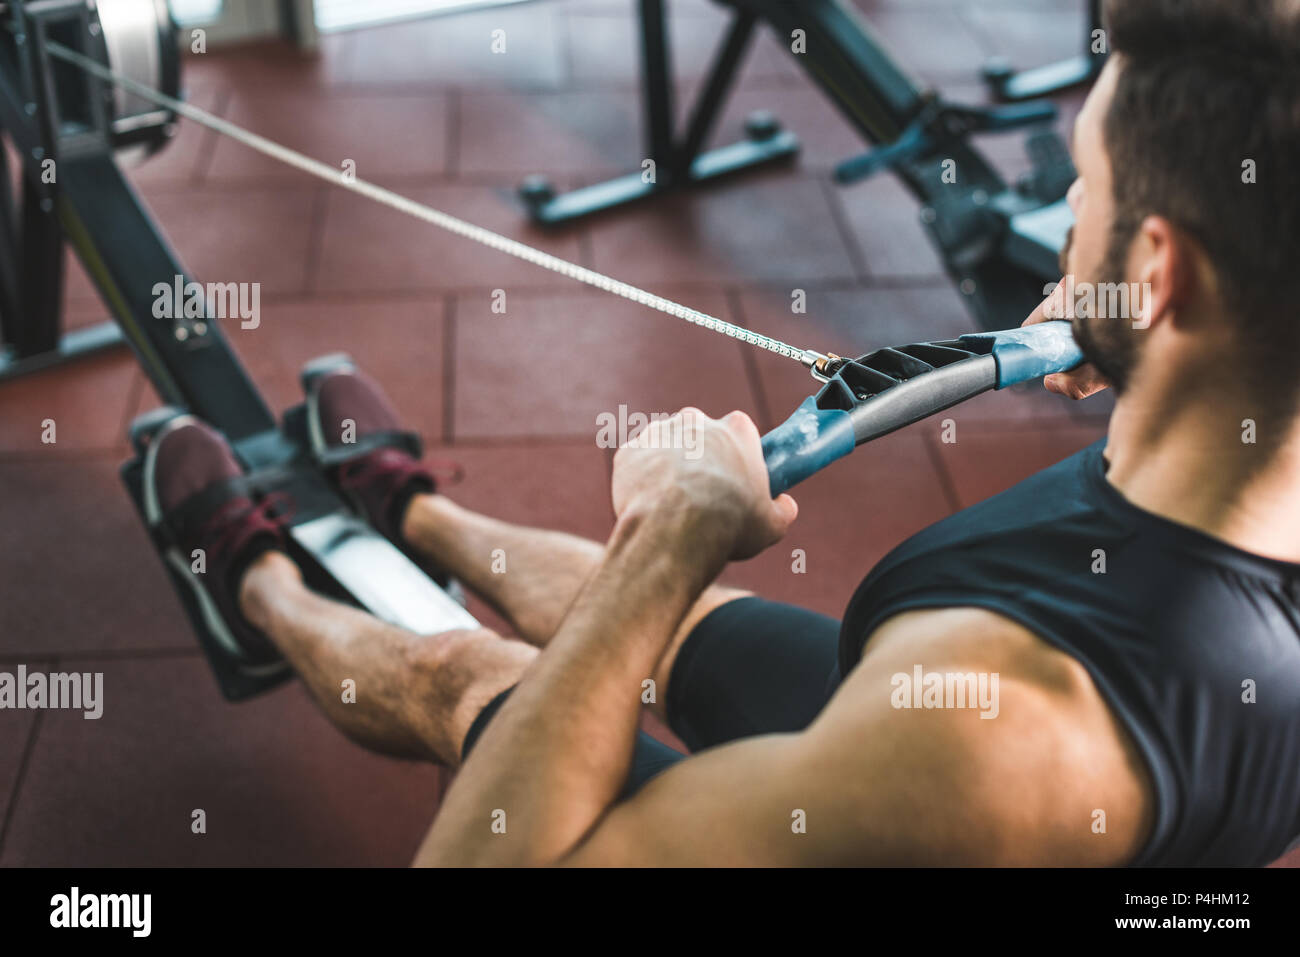 Cropped image of young sportsman doing exercise on rowing machine in sports center Stock Photo